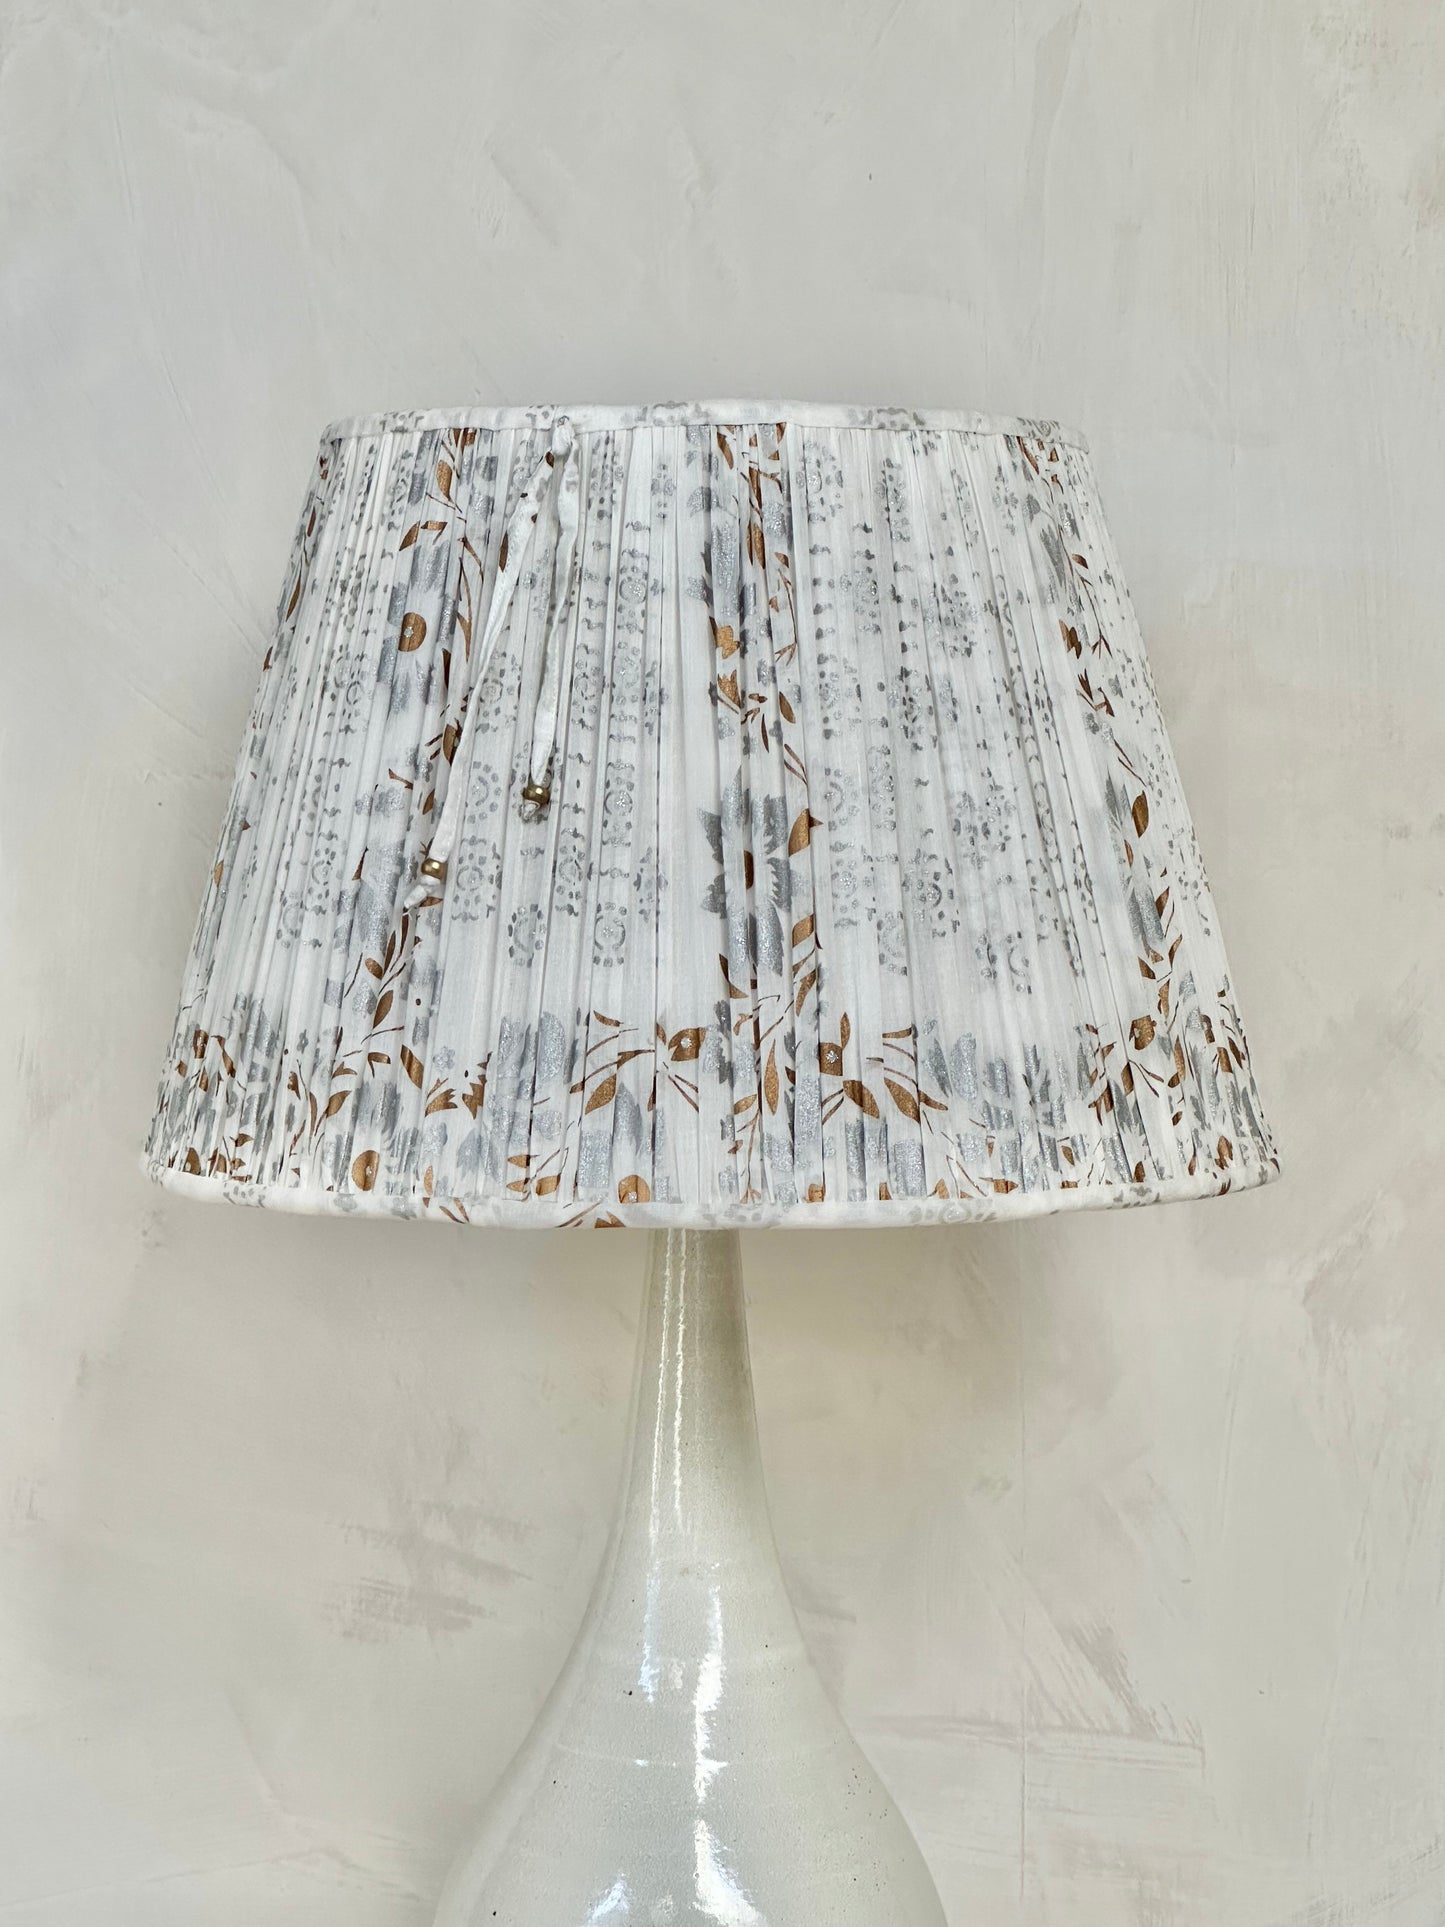 A pair of white, silver and gold sari lampshades